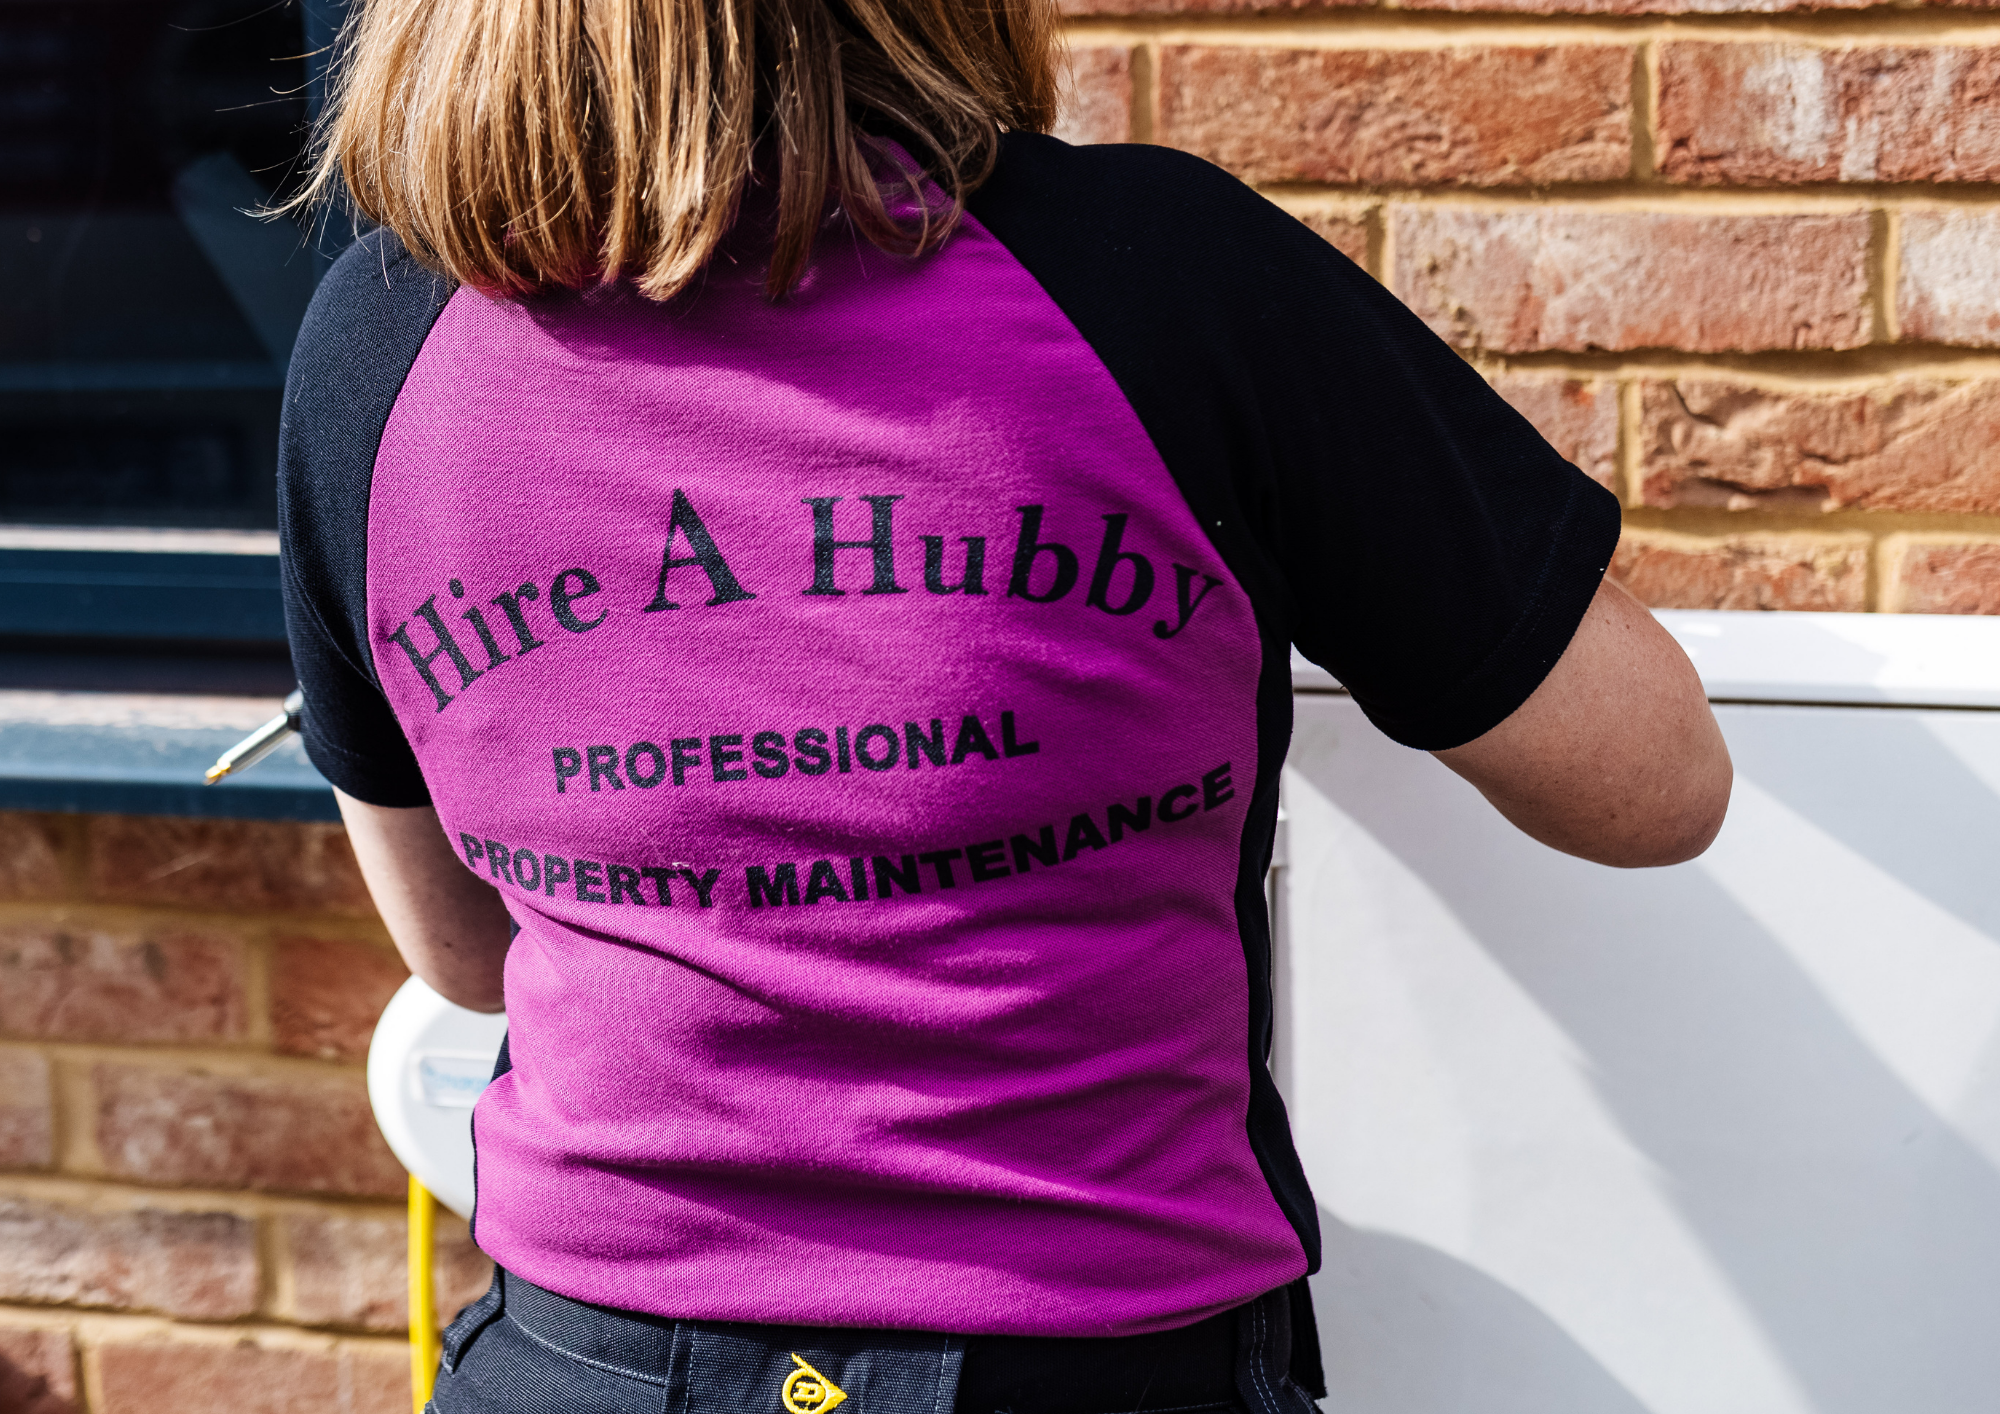 Hire A Hubby - A Property Maintenance business for everyone with the right skills!